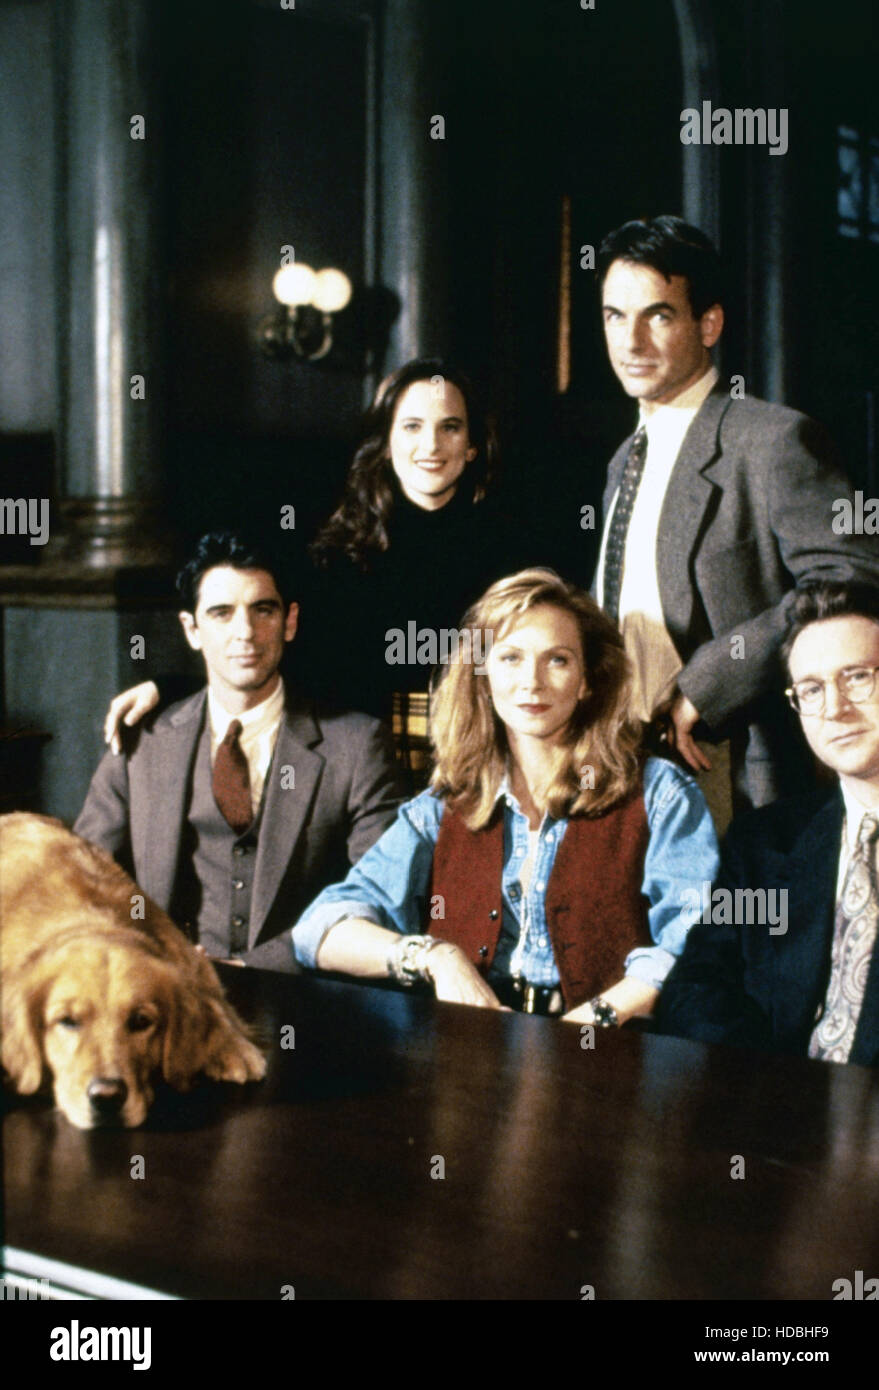 DOUBTS, front from left: William Converse-Roberts, Nancy Everhard, rear from left: Marlee Matlin, Mark Harmon Stock Photo - Alamy